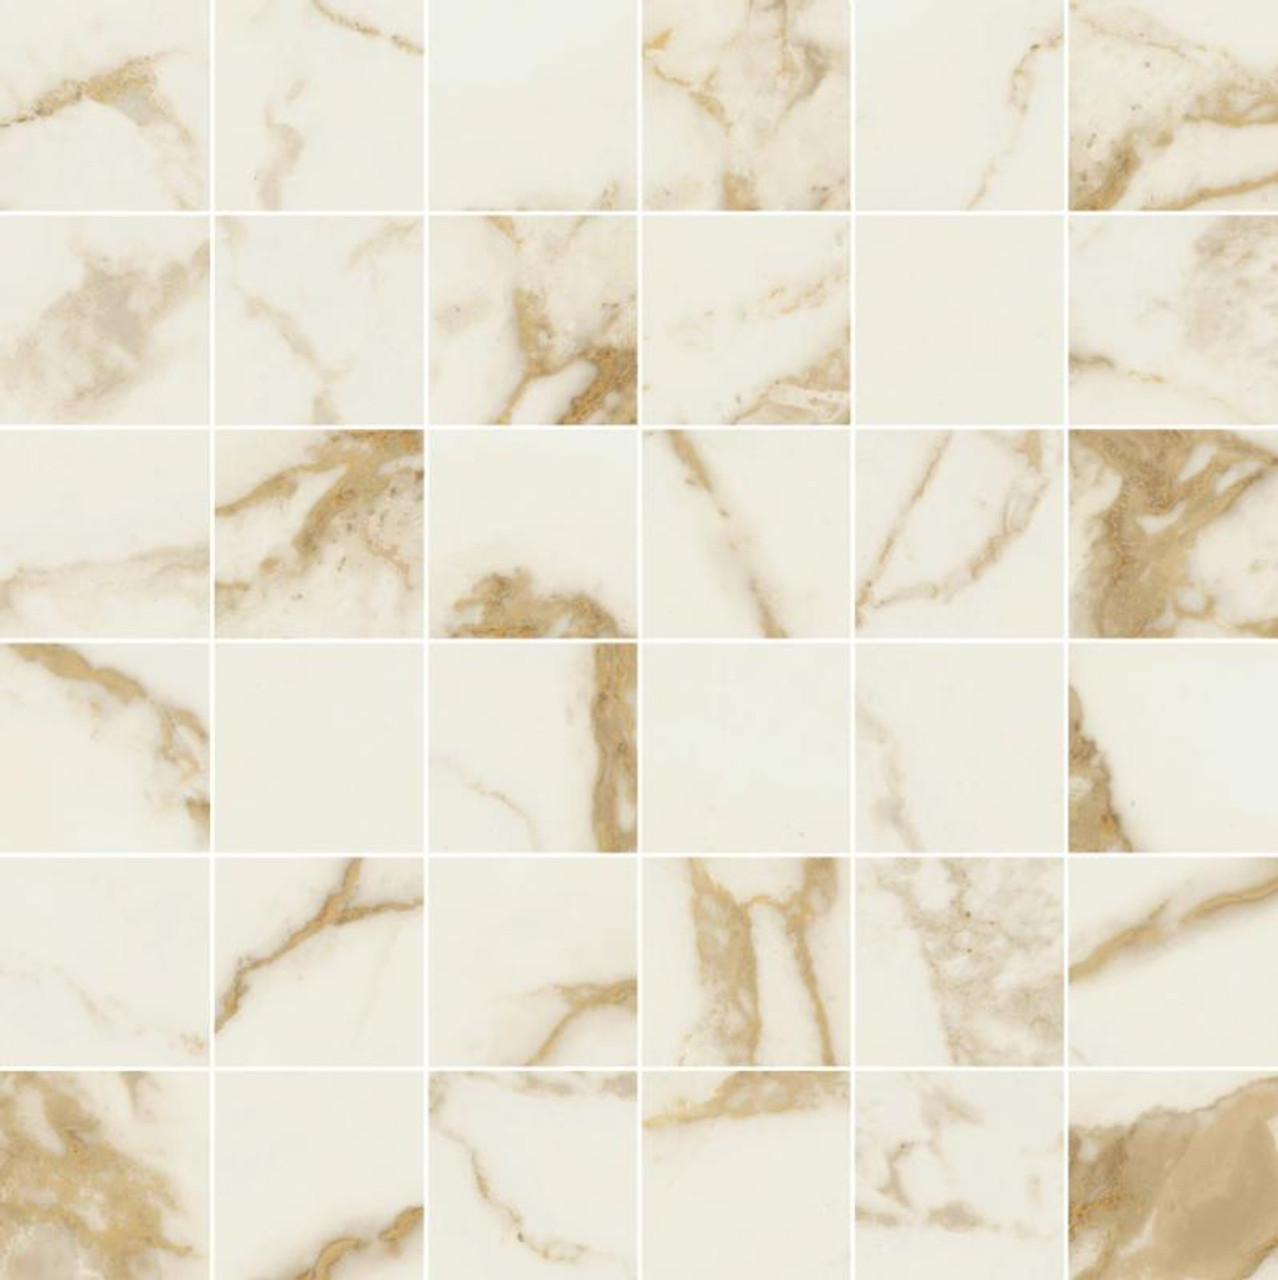 Calacatta Gold Basket Pattern Mosaic Tile  Online Tile Store with Free  Shipping on Qualifying Orders